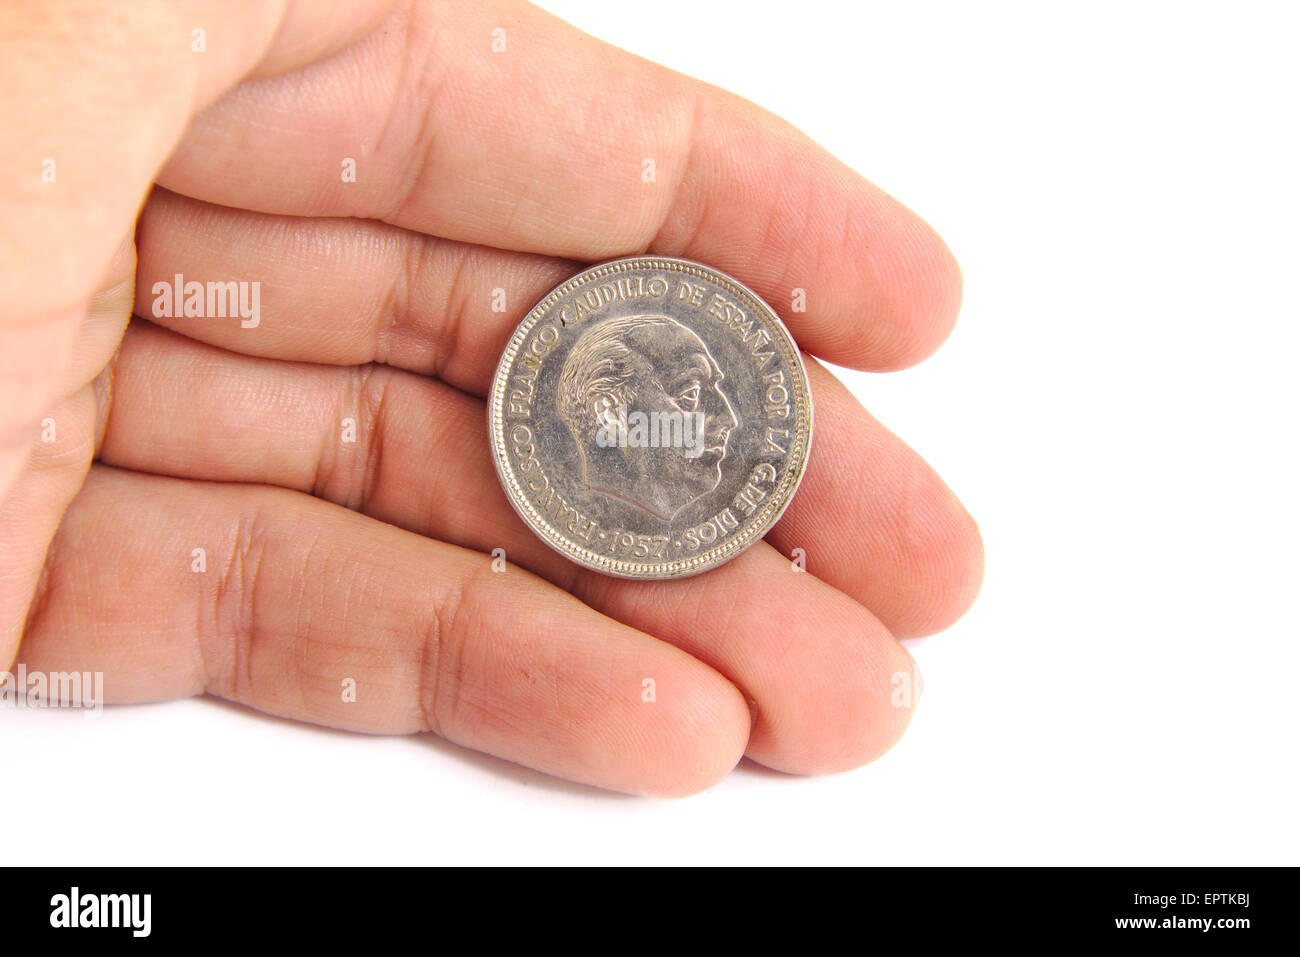 Caucasian man hand holding an old Spanish coin of 50 pesetas showing Franco dictator face on a white background. 1957 Stock Photo